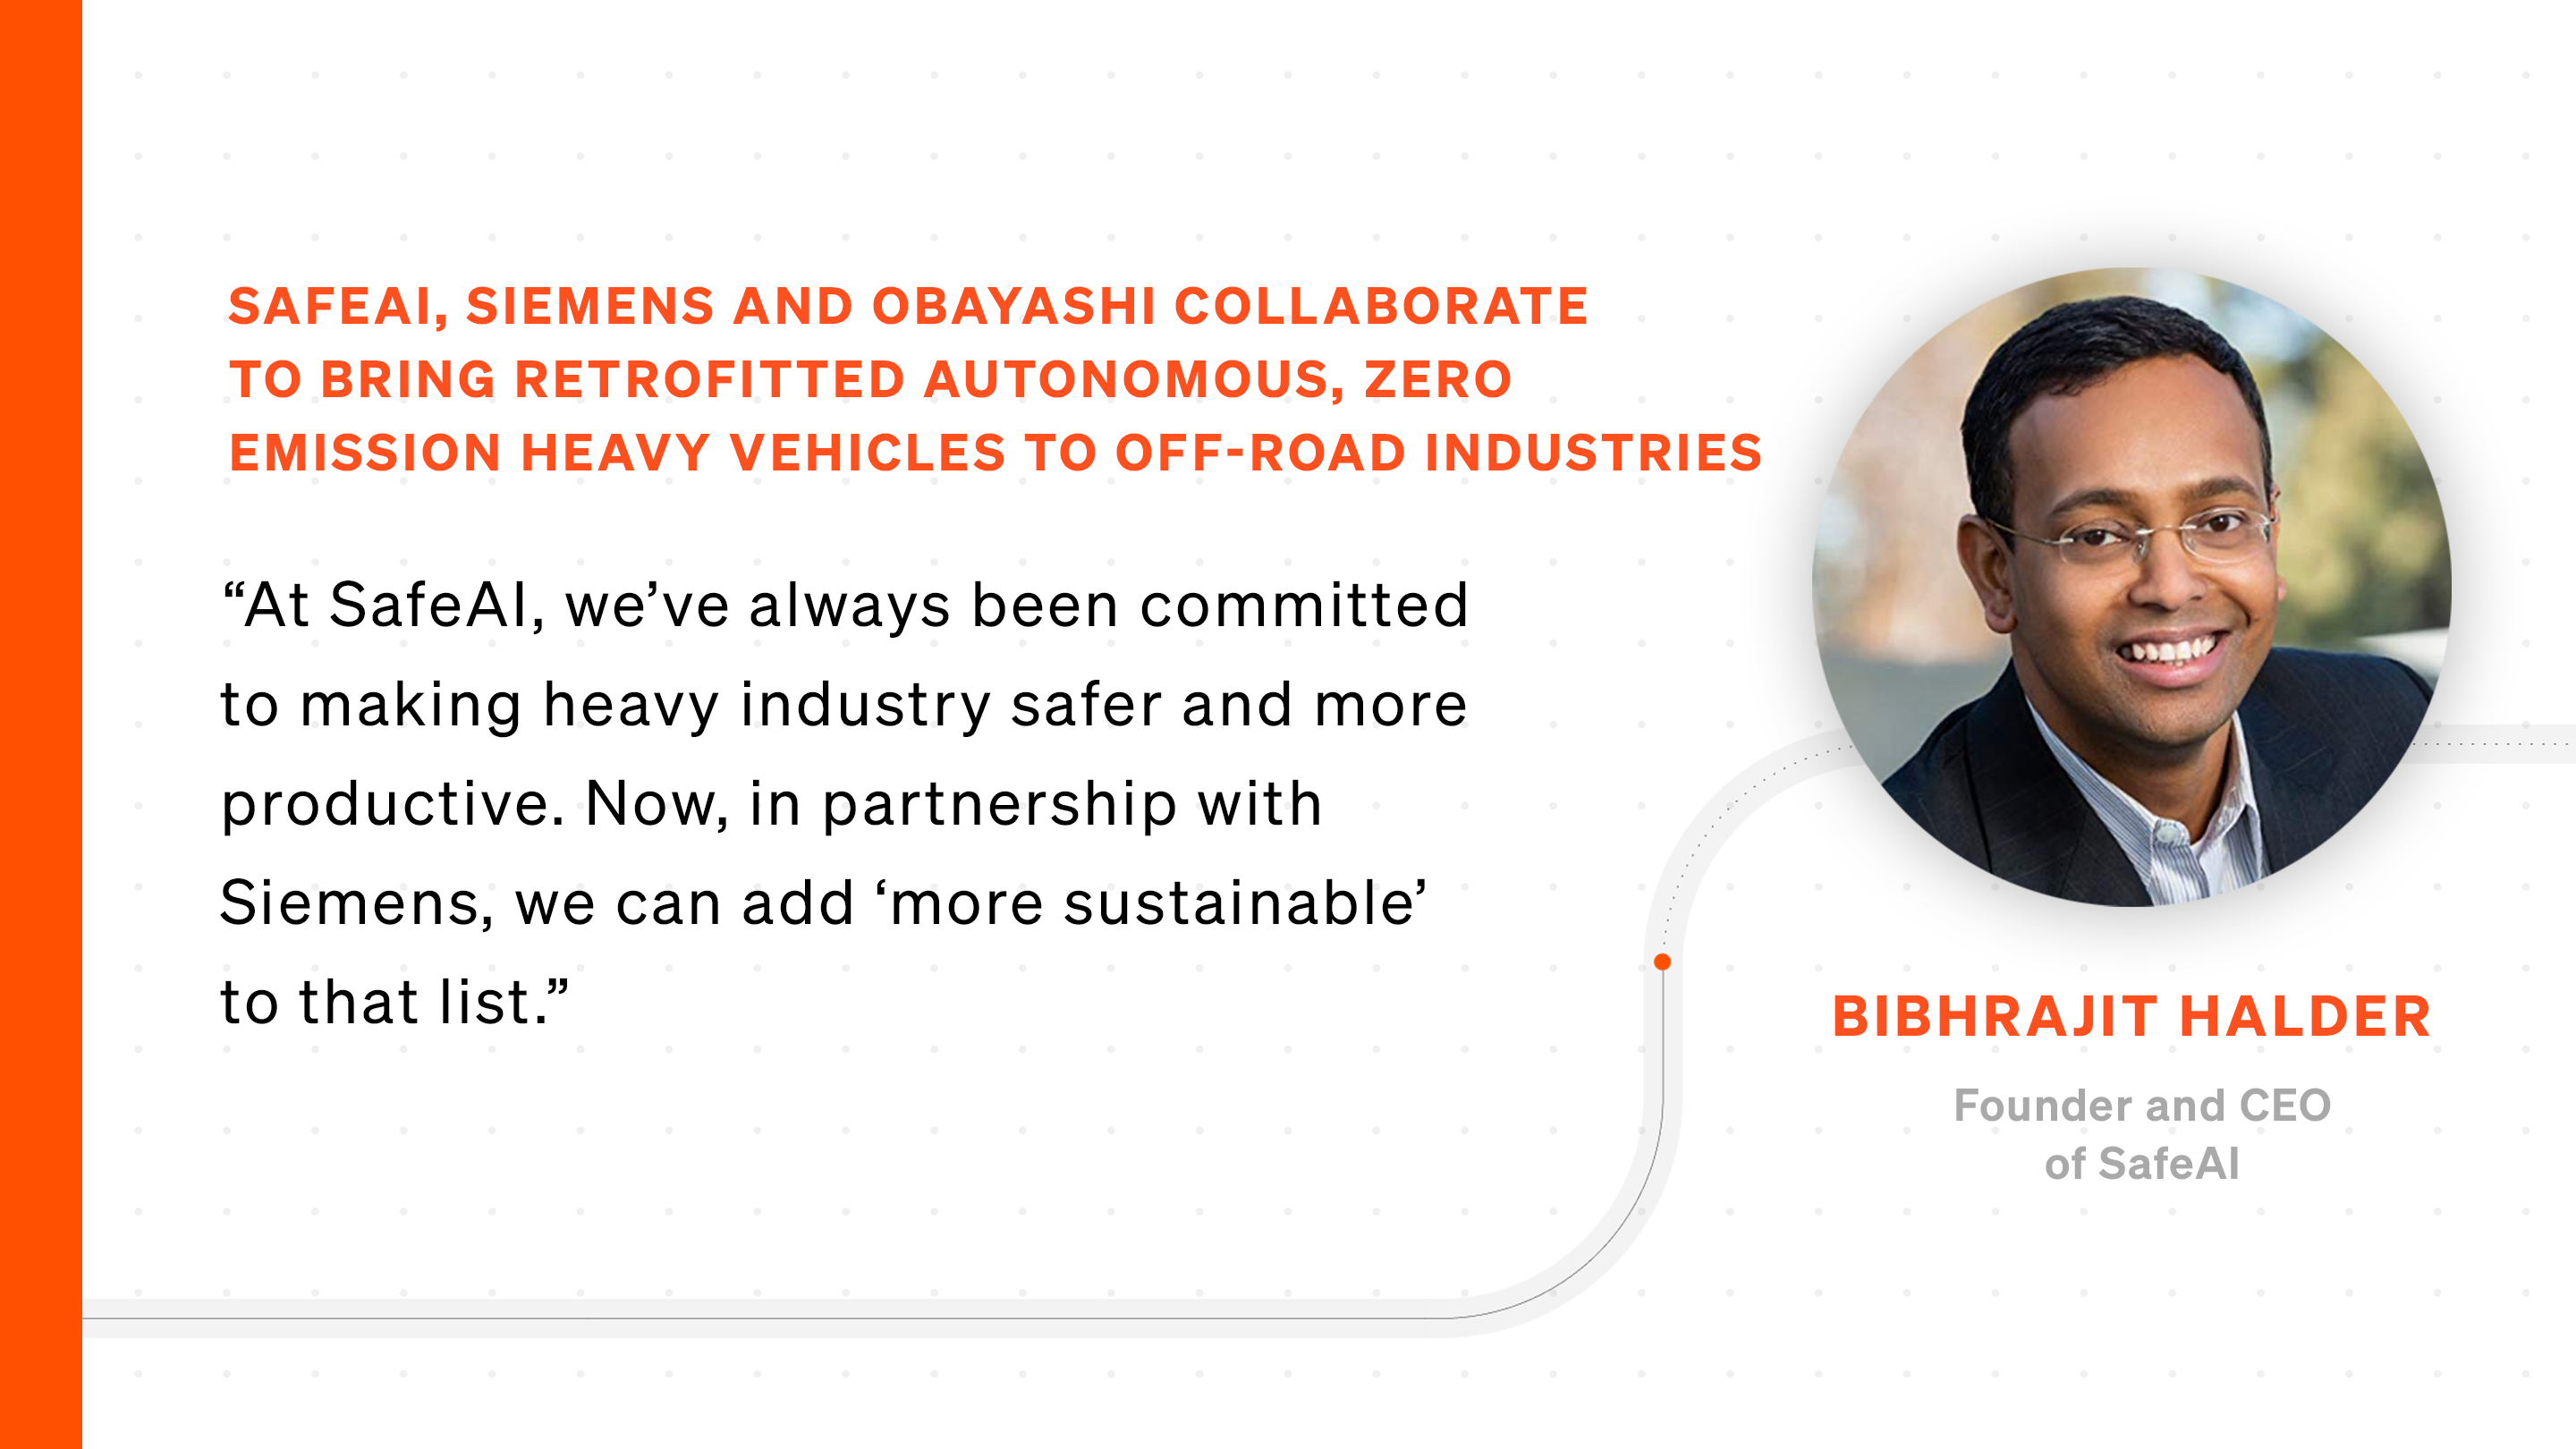 SafeAI, Siemens and Obayashi Collaborate to Bring Retrofitted Autonomous, Zero Emission Heavy Vehicles to Off-road Industries